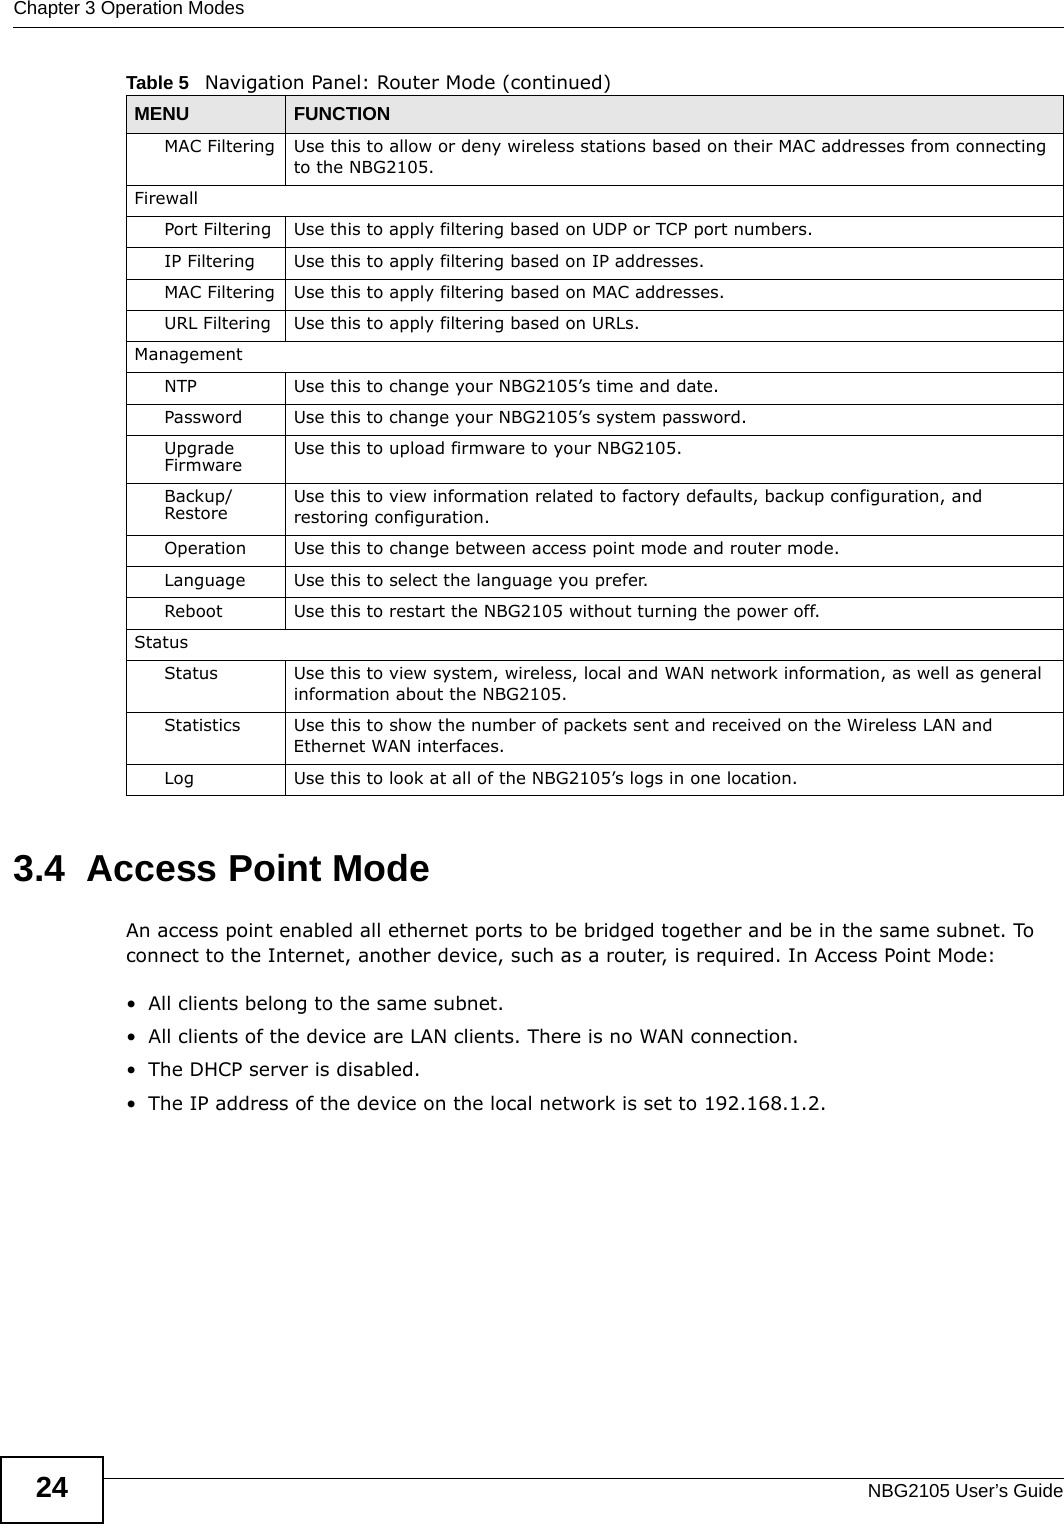 Chapter 3 Operation ModesNBG2105 User’s Guide243.4  Access Point ModeAn access point enabled all ethernet ports to be bridged together and be in the same subnet. To connect to the Internet, another device, such as a router, is required. In Access Point Mode:• All clients belong to the same subnet. • All clients of the device are LAN clients. There is no WAN connection.• The DHCP server is disabled. • The IP address of the device on the local network is set to 192.168.1.2.MAC Filtering Use this to allow or deny wireless stations based on their MAC addresses from connecting to the NBG2105.FirewallPort Filtering Use this to apply filtering based on UDP or TCP port numbers. IP Filtering Use this to apply filtering based on IP addresses.MAC Filtering Use this to apply filtering based on MAC addresses.URL Filtering Use this to apply filtering based on URLs.ManagementNTP Use this to change your NBG2105’s time and date.Password Use this to change your NBG2105’s system password.Upgrade Firmware Use this to upload firmware to your NBG2105.Backup/Restore Use this to view information related to factory defaults, backup configuration, and restoring configuration.Operation Use this to change between access point mode and router mode.Language Use this to select the language you prefer.Reboot Use this to restart the NBG2105 without turning the power off.StatusStatus Use this to view system, wireless, local and WAN network information, as well as general information about the NBG2105.Statistics Use this to show the number of packets sent and received on the Wireless LAN and Ethernet WAN interfaces.Log Use this to look at all of the NBG2105’s logs in one location.Table 5   Navigation Panel: Router Mode (continued)MENU FUNCTION